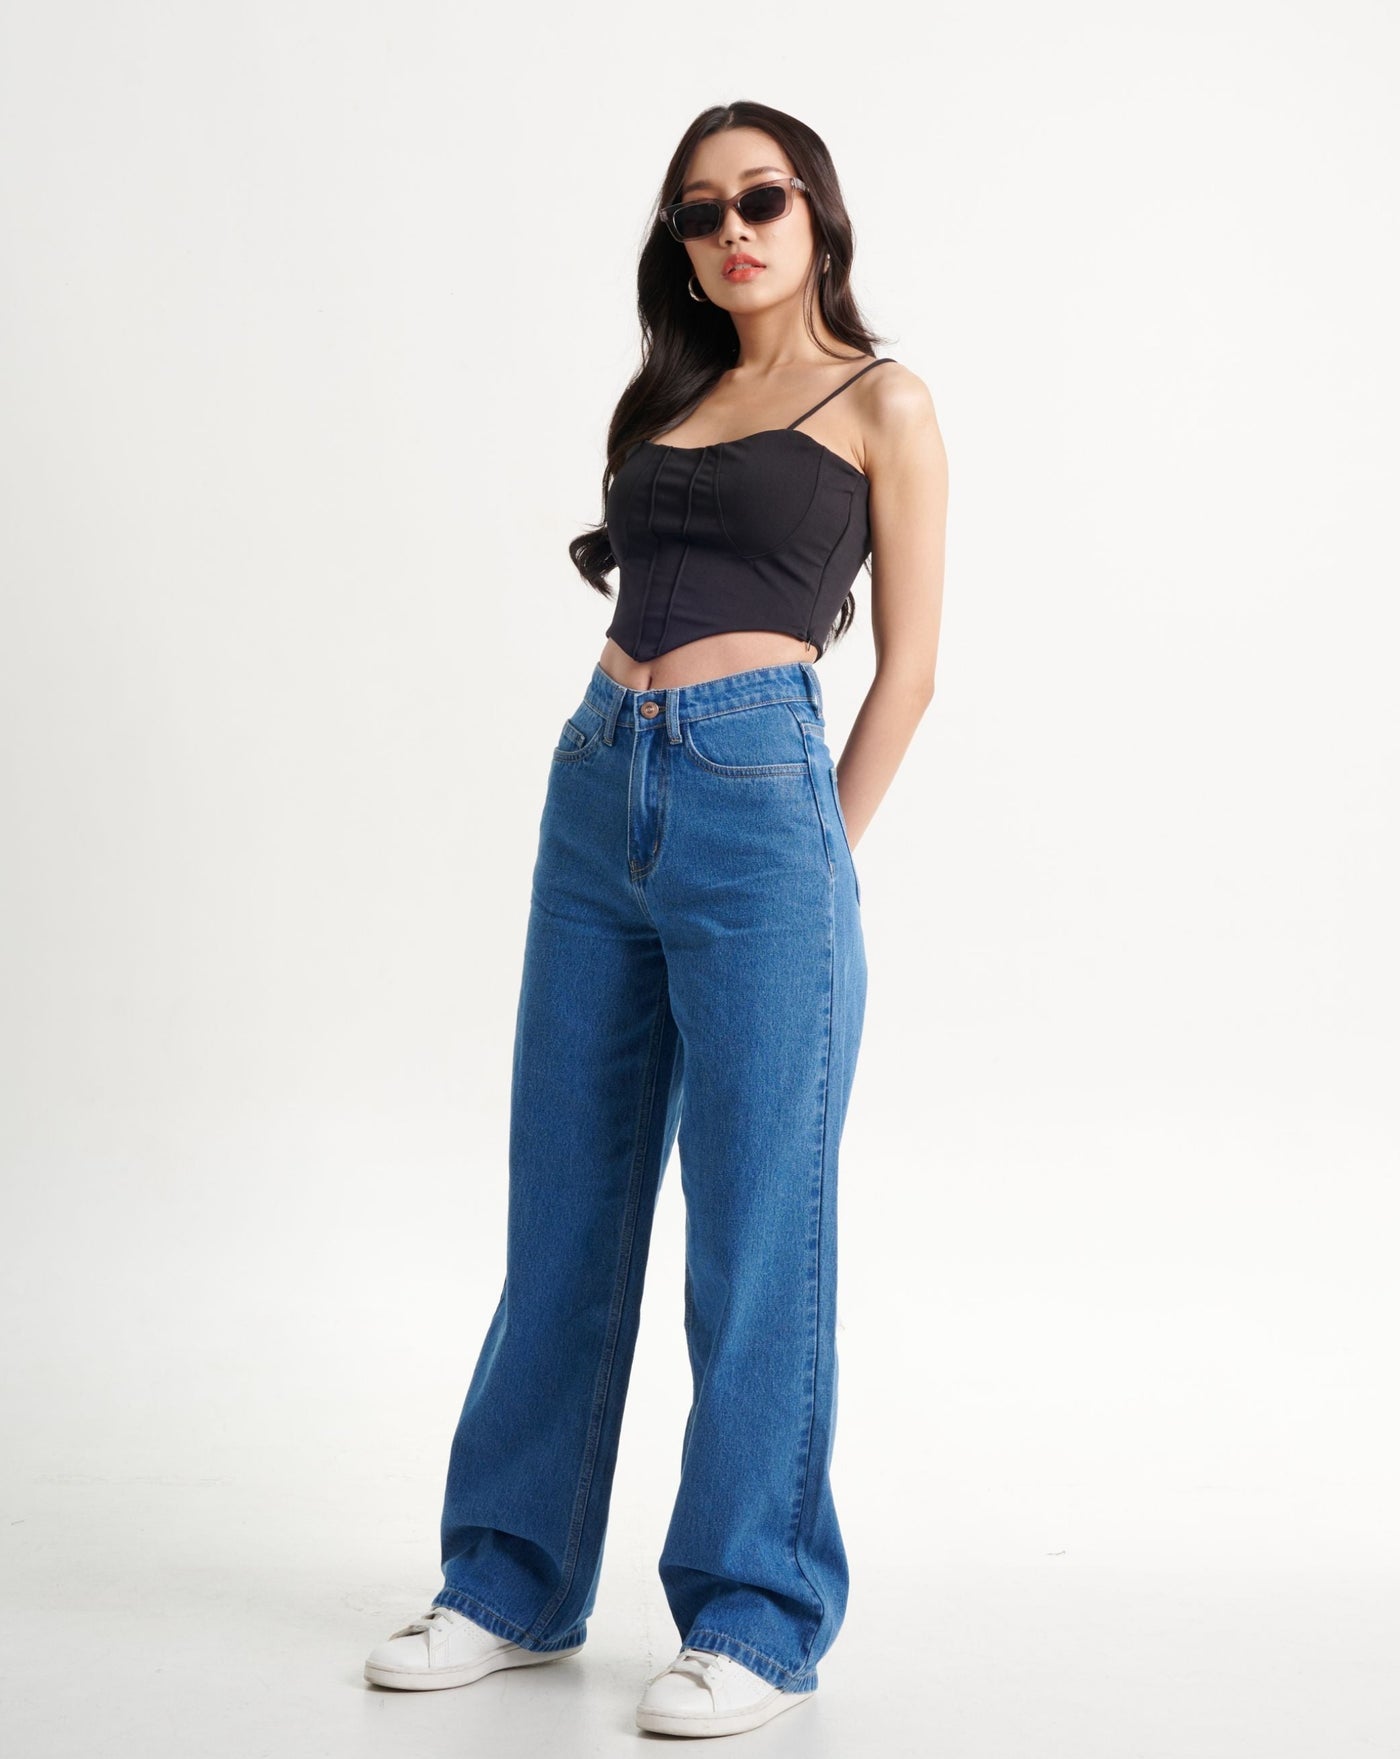 Best High Street Jeans: 19 Pairs Of High Street Jeans To Shop Now | Glamour  UK